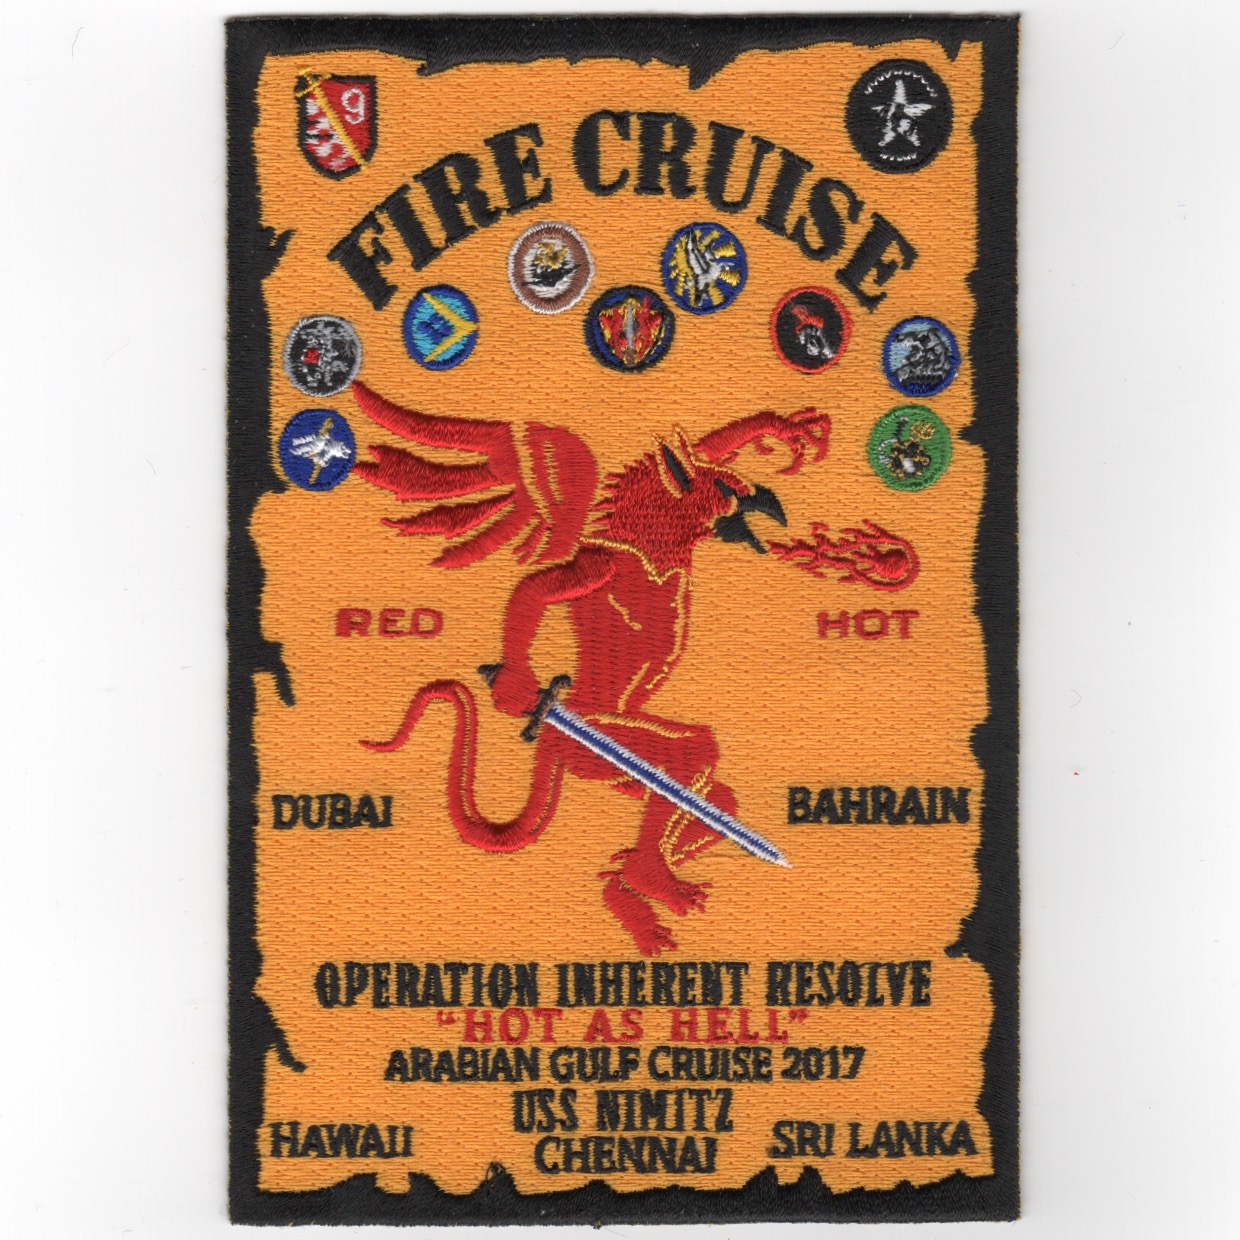 VFA-154/CVN-68 'FIRE CRUISE' Patch (Yellow)